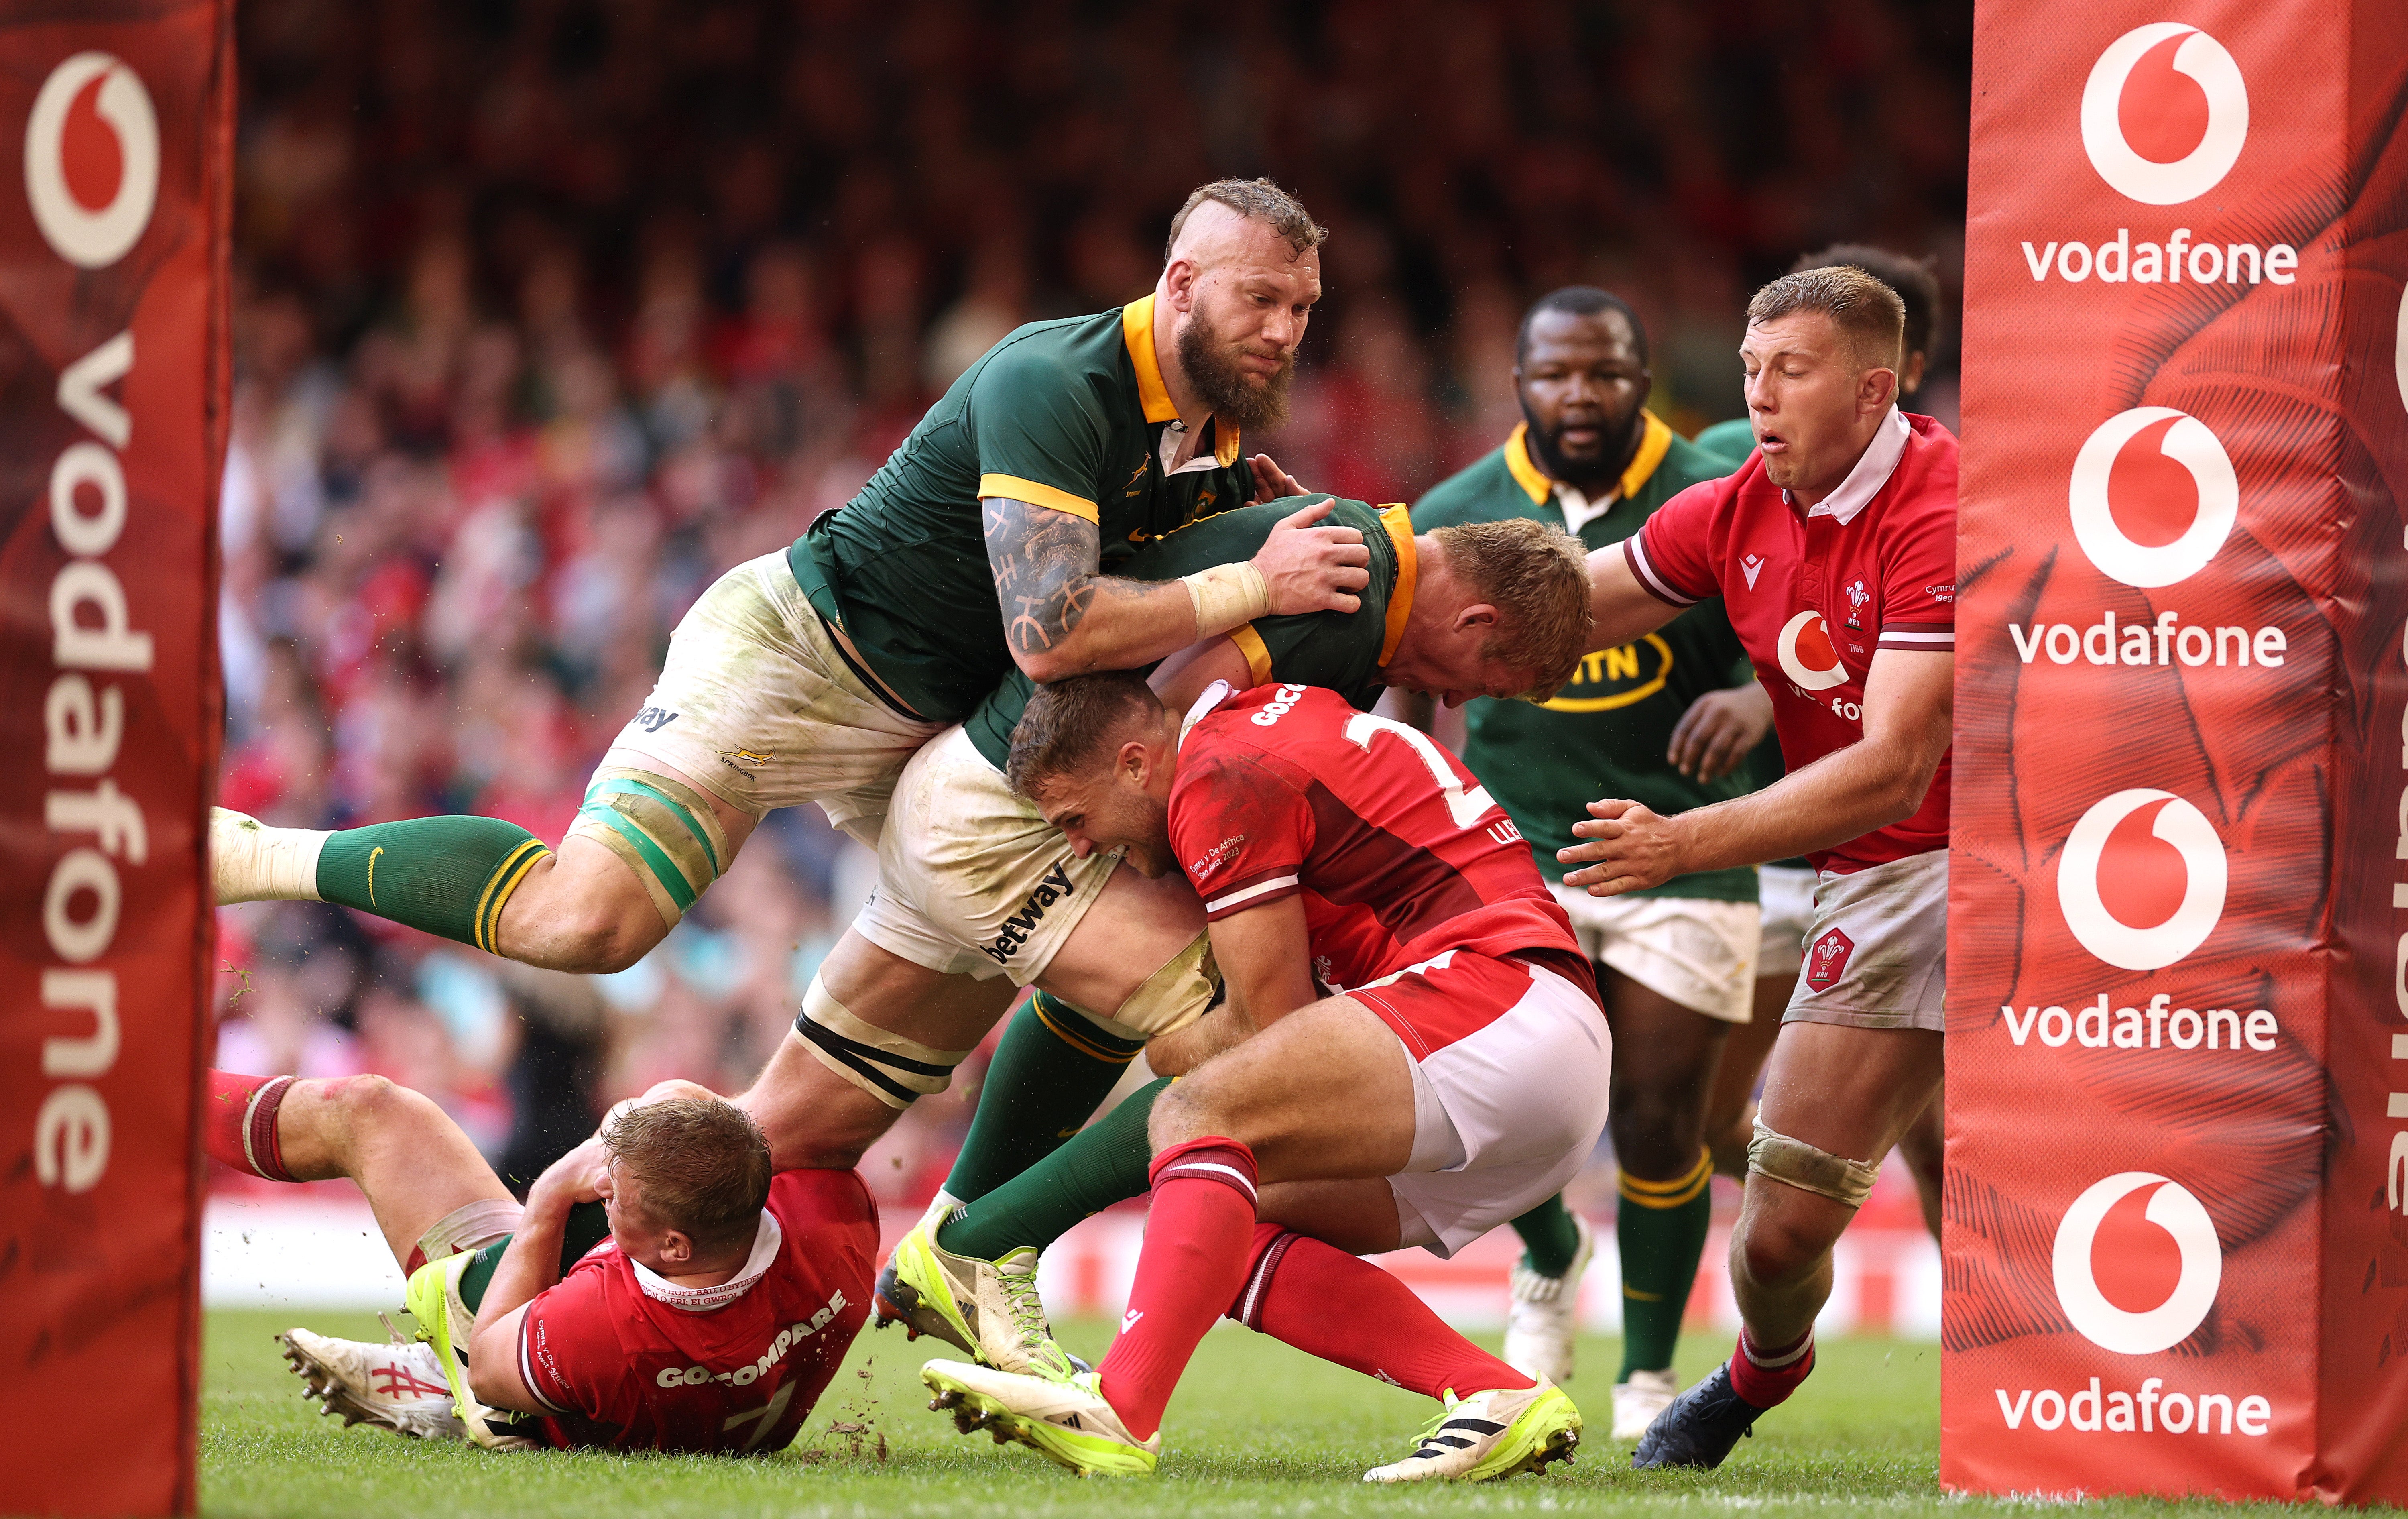 The Springboks dominated from the off in Cardiff